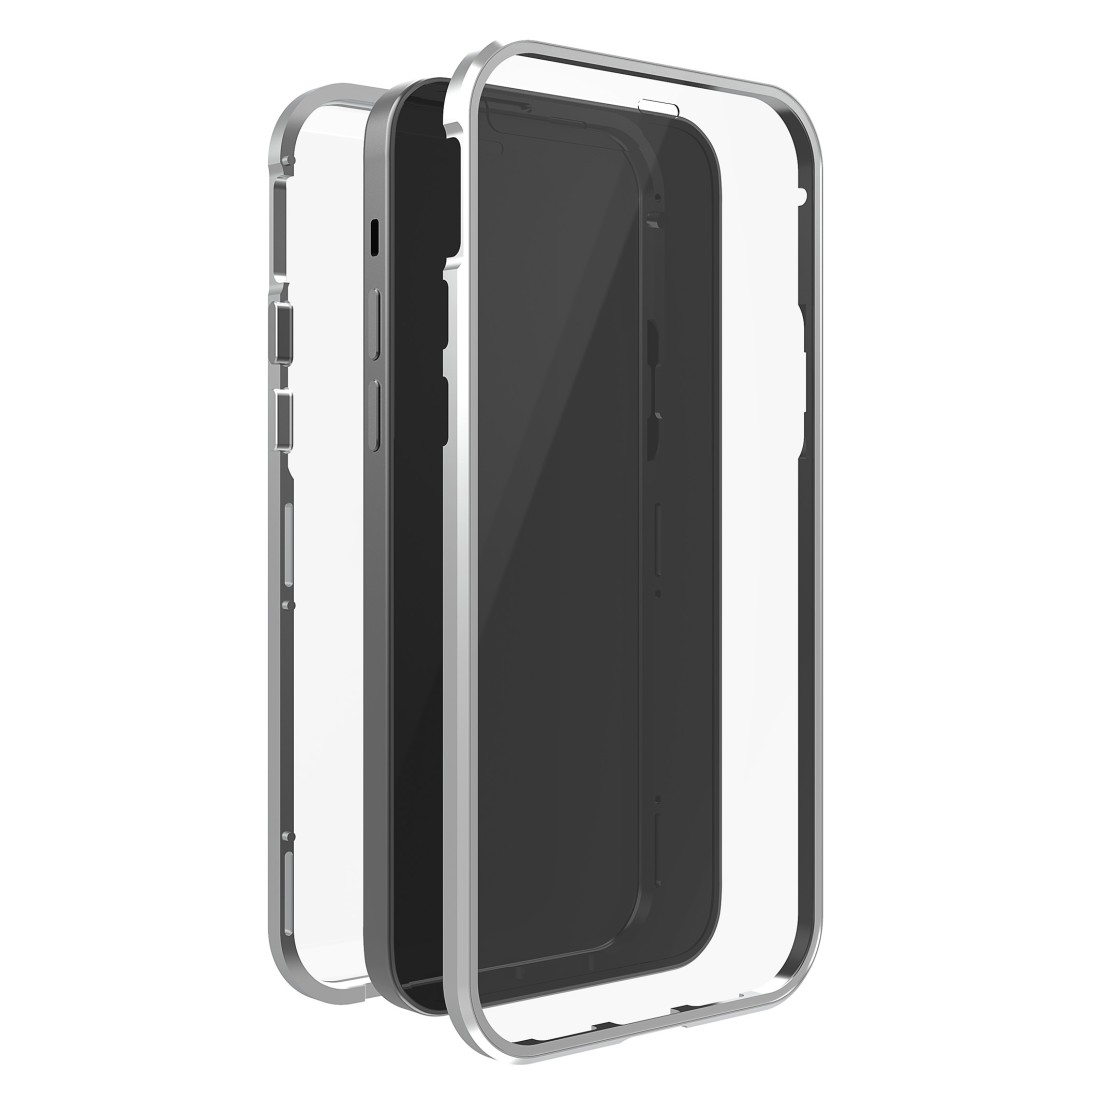 Pro, BLACK iPhone ROCK 360° 13 Apple, Silber Glass, Full Cover,